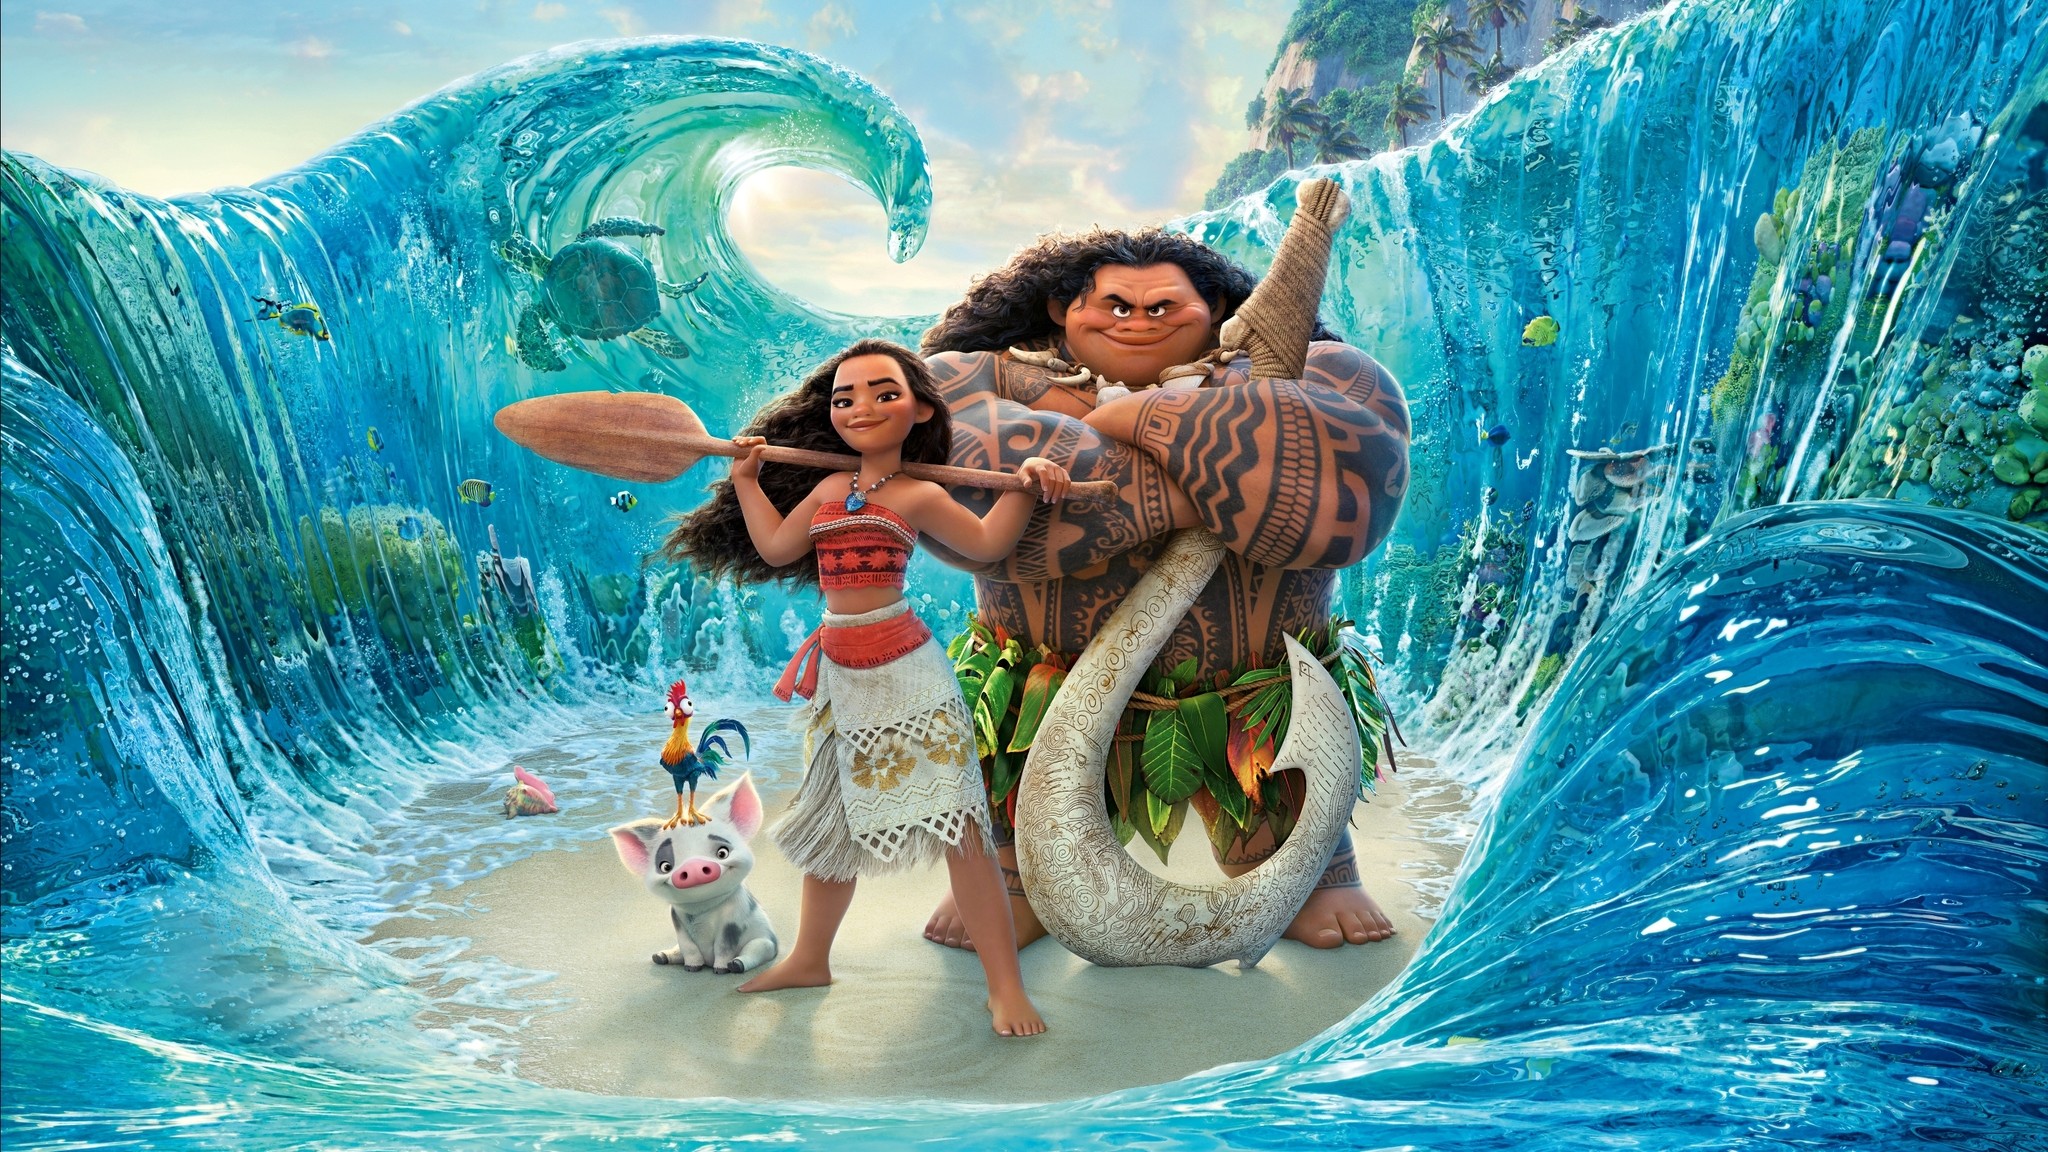 2048x1152 Moana HD Images #MoanaHDImages #Moana #movies #hdwallpapers #wallpapers